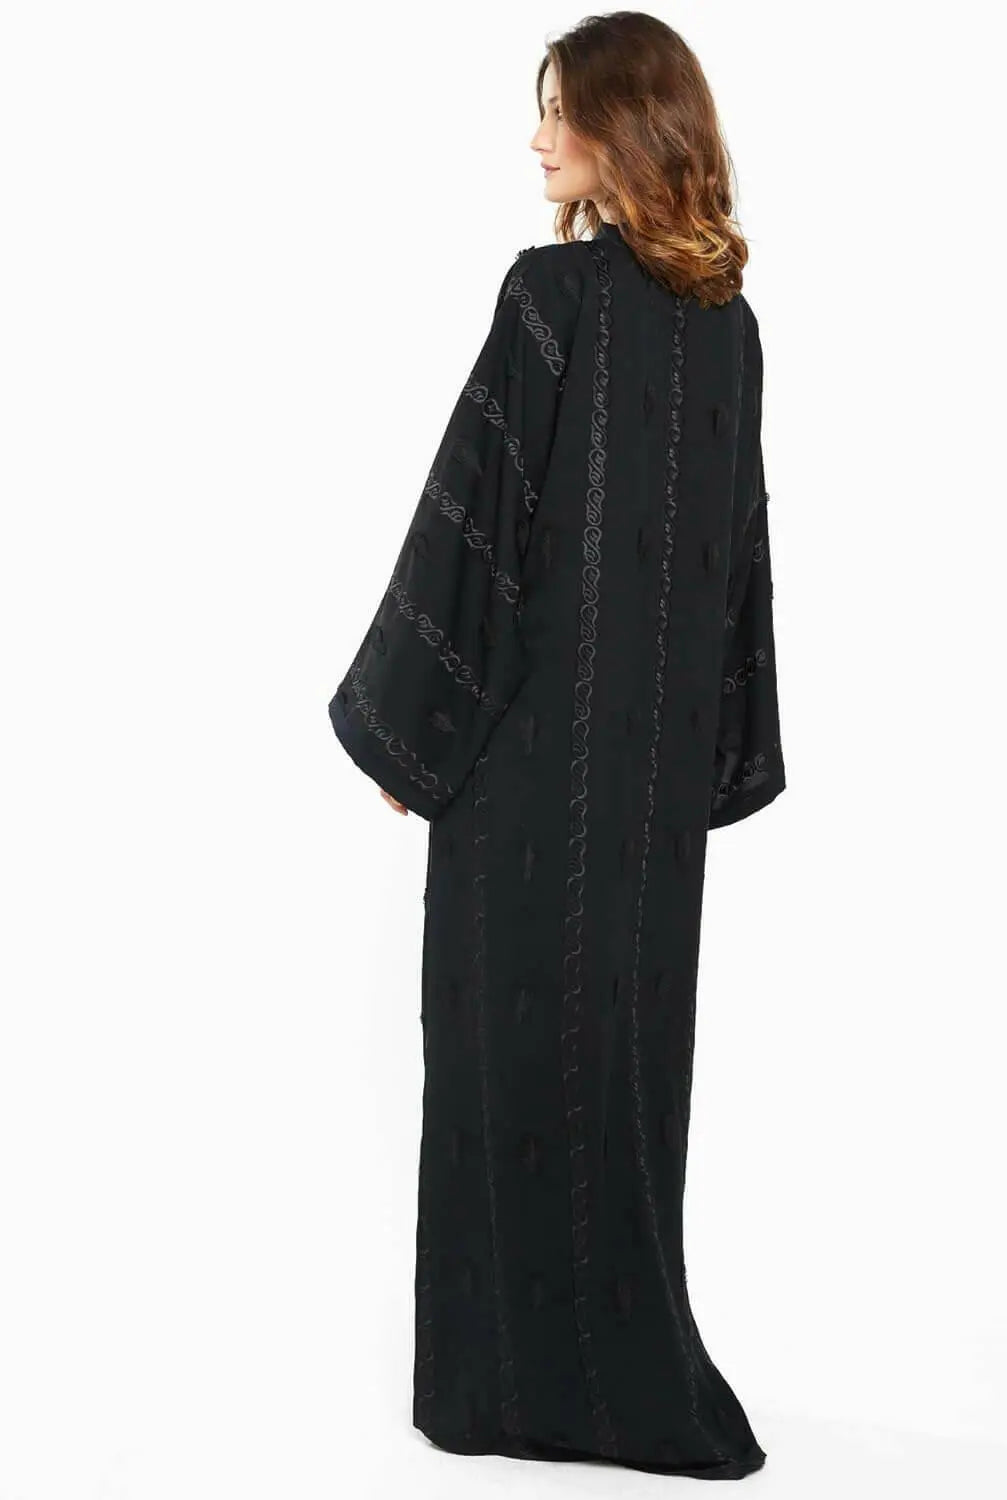 Women's Premium Abaya Made With Fine Fabric, Comes With Matching Hijab